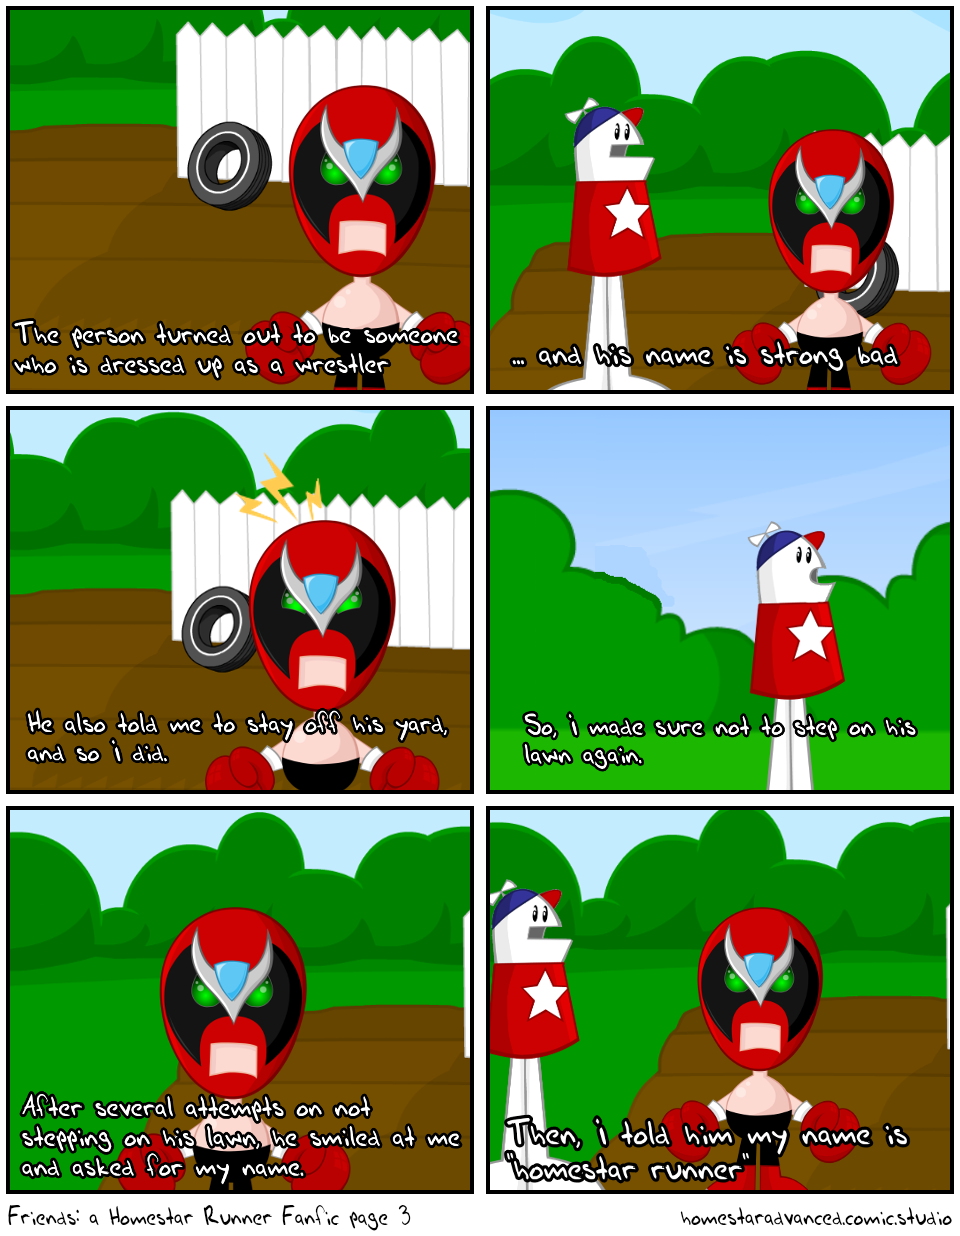 COUNTRYHUMANS GALLERY 3 - Axis and Allies comic